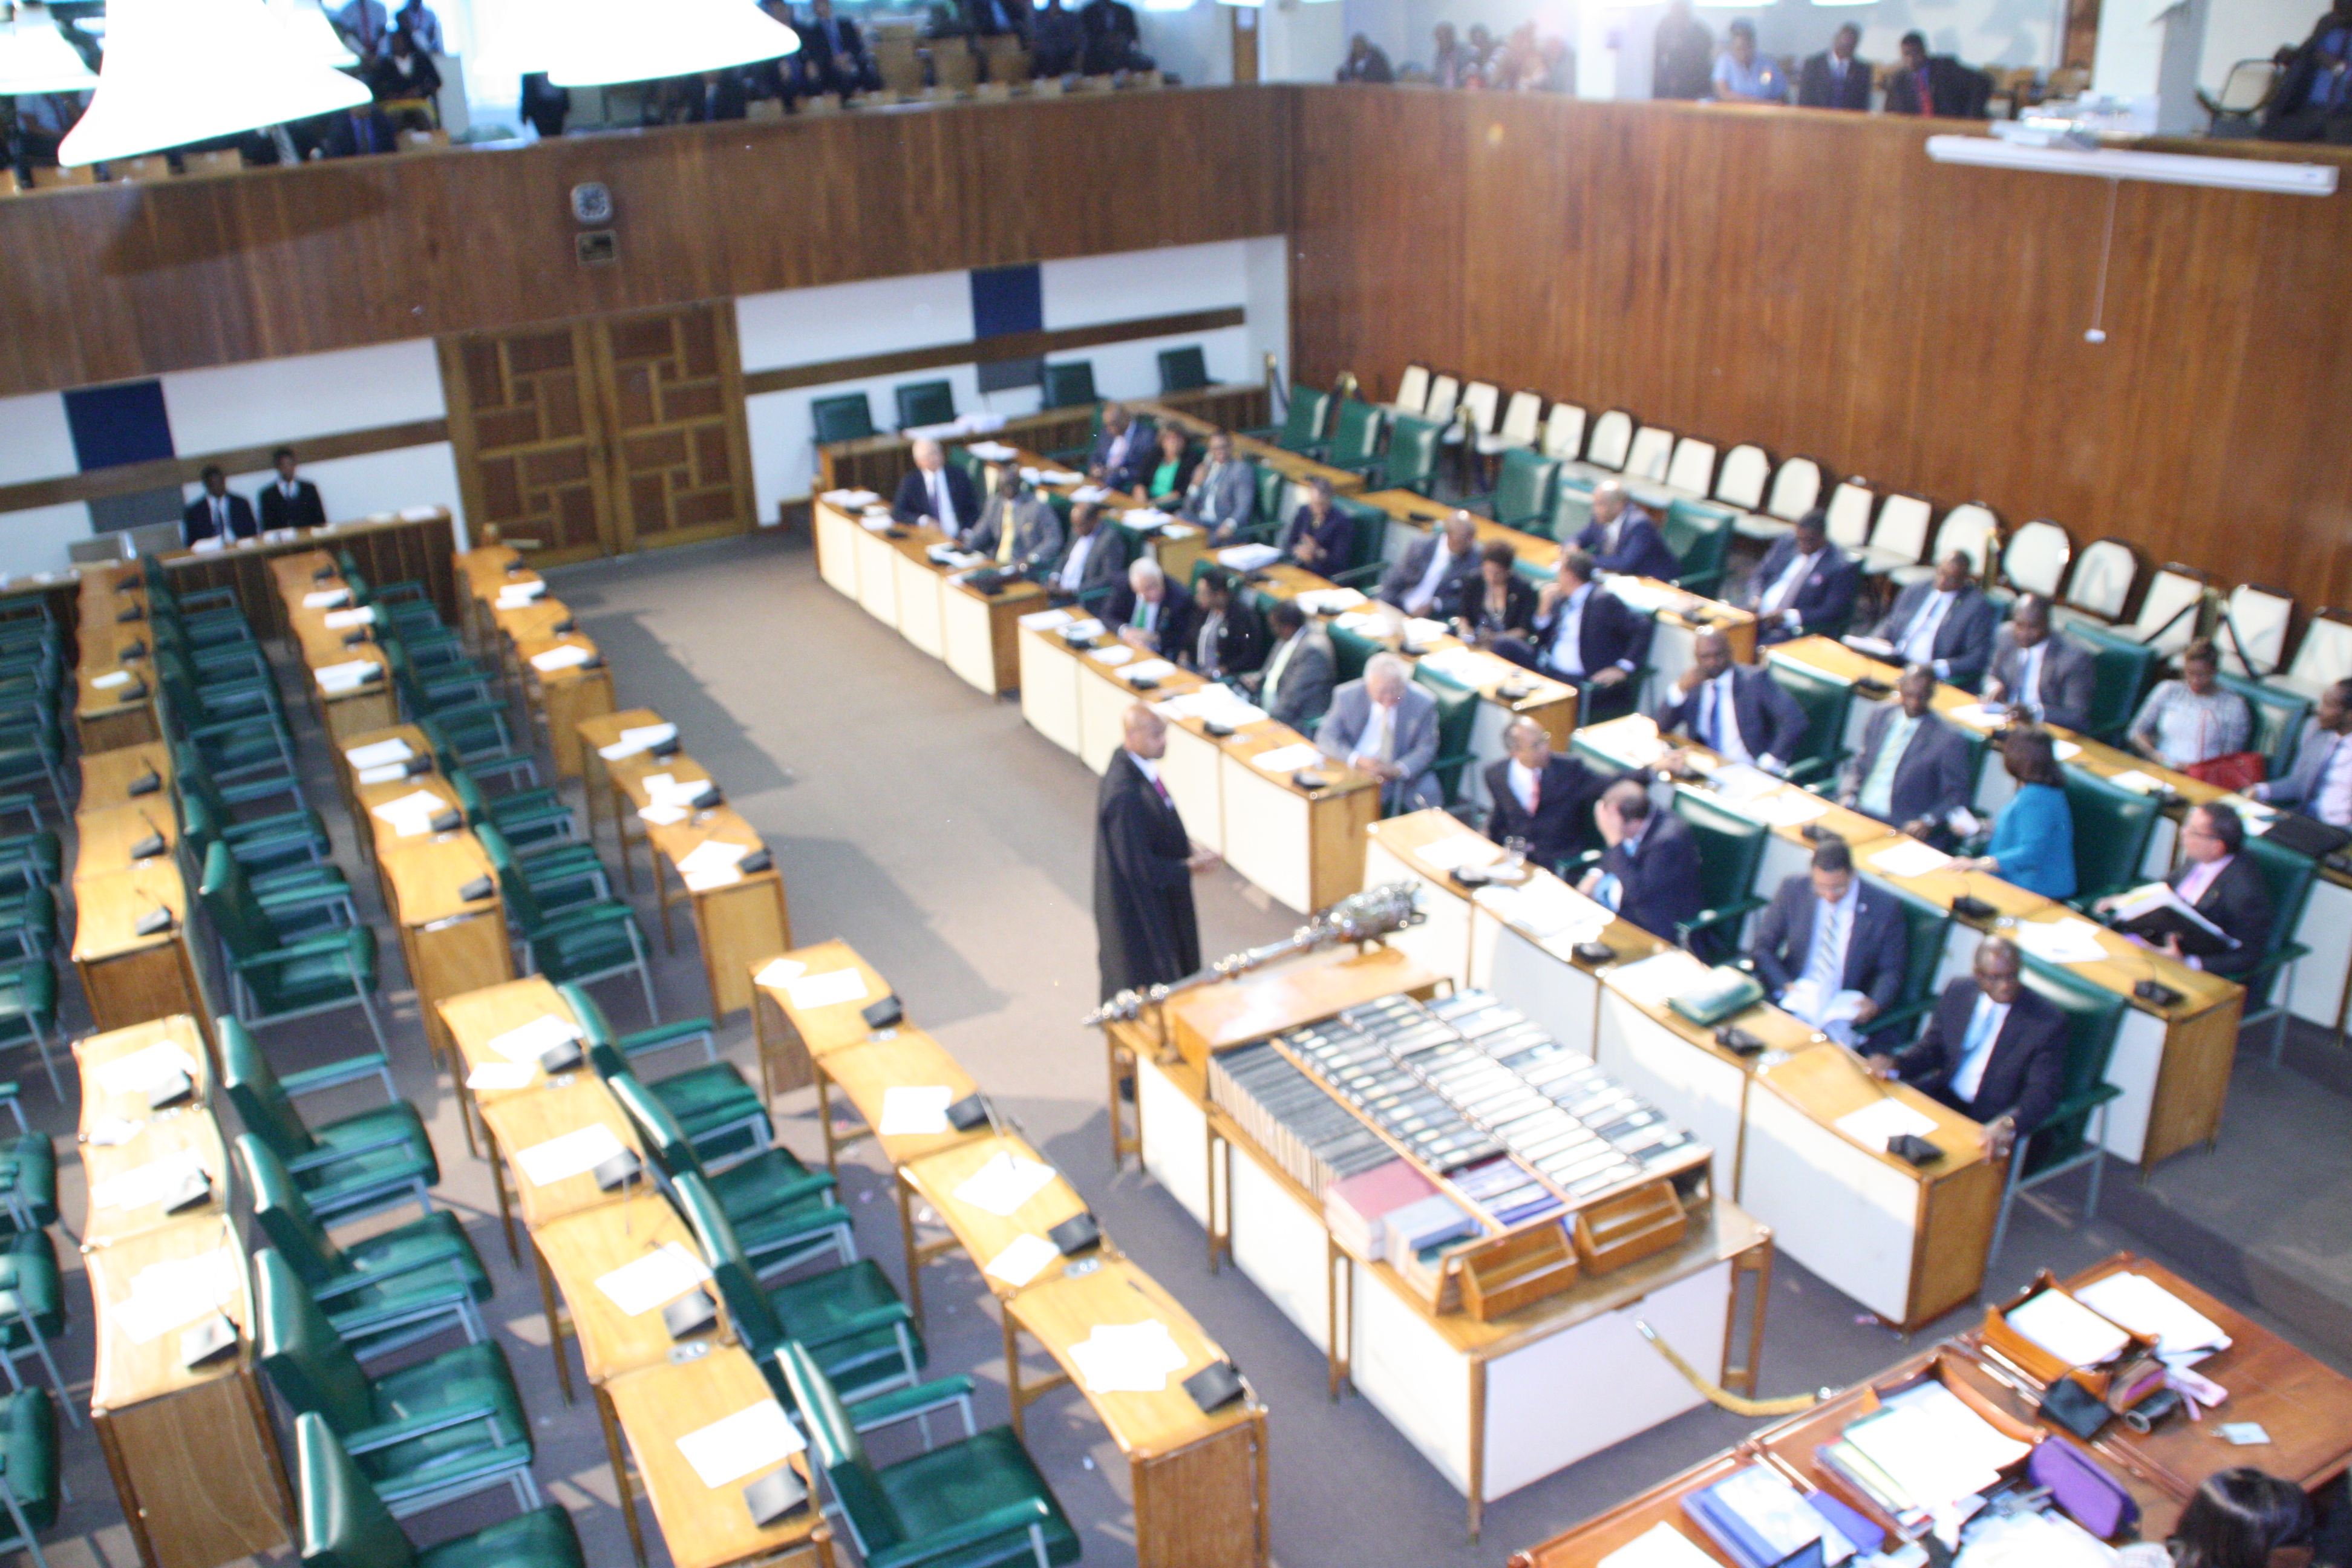 Opposition Benches were empty as a result of the walk out